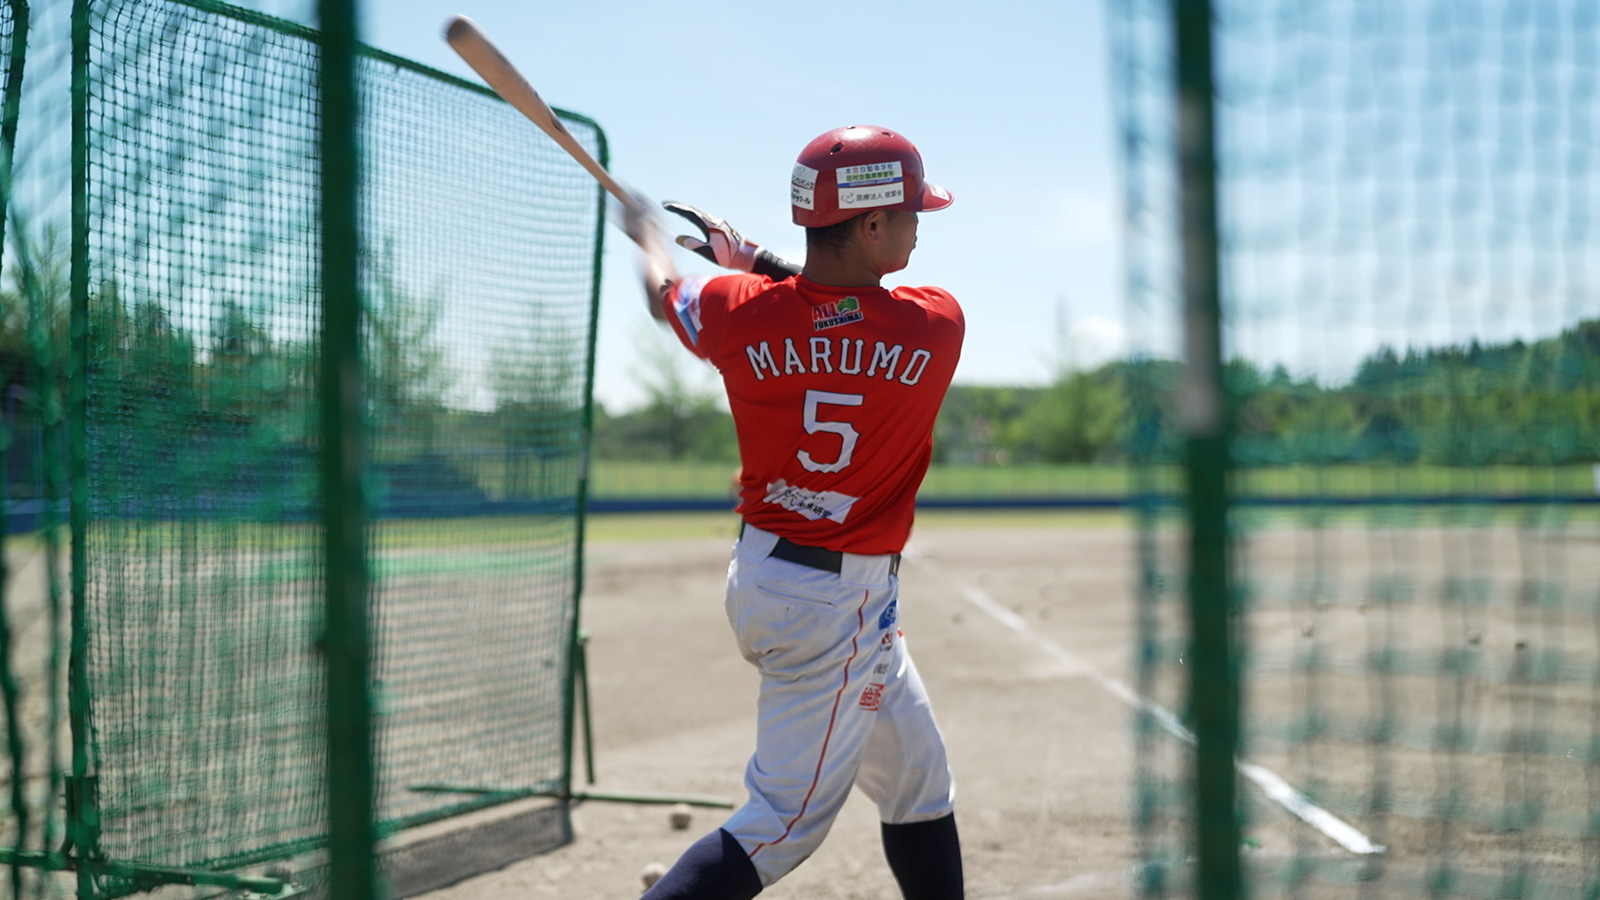 Baseball is part of Japan's culture, with fans tuning in every season to cheer on their favorite teams.